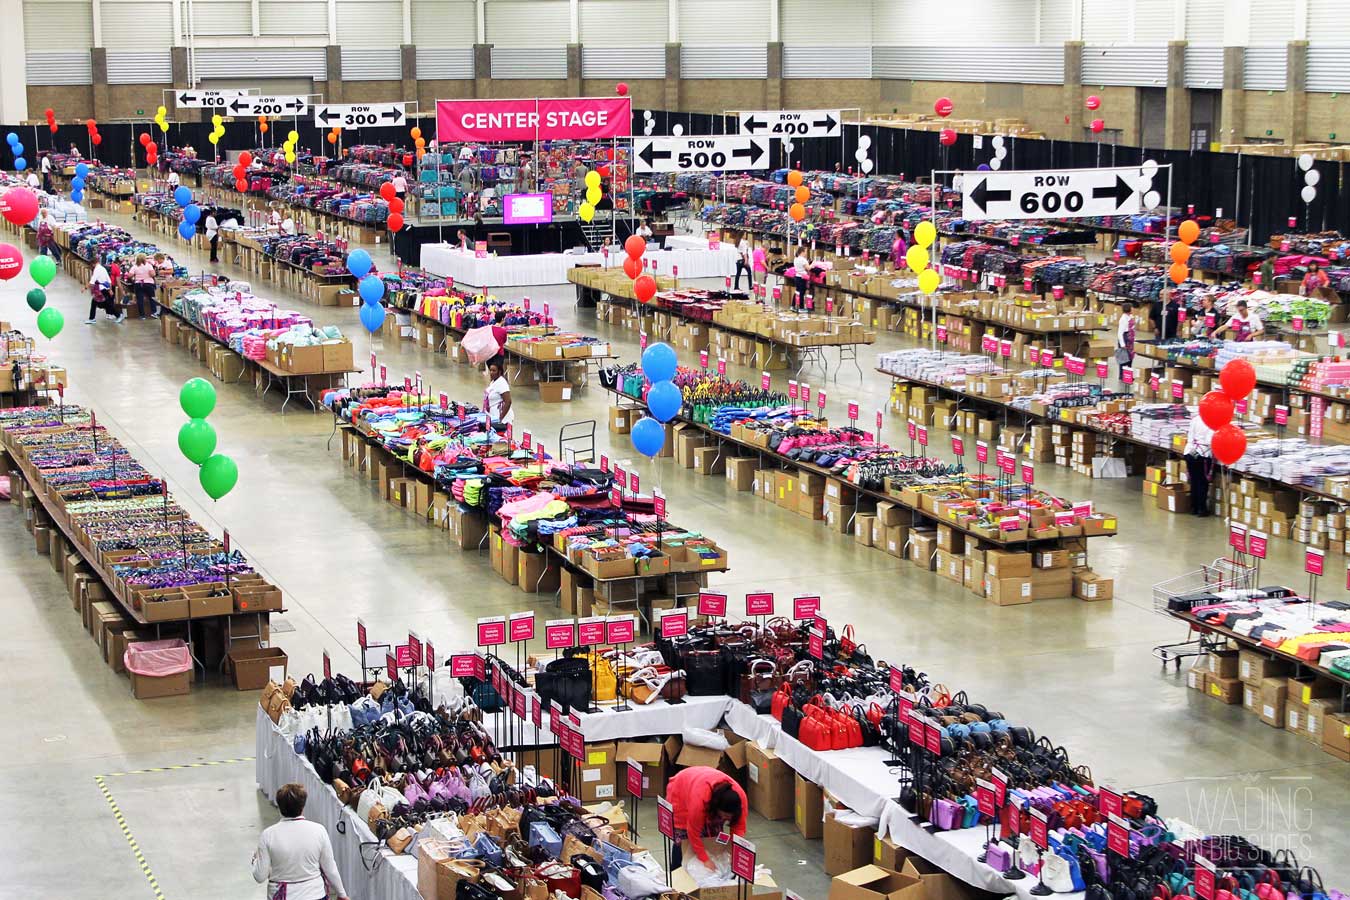 Girls’ Getaway Weekend: Inside Vera Bradley’s Massive Annual Outlet Sale (via Wading in Big Shoes) | The Vera Bradley annual outlet sale in Fort Wayne, Indiana features 100,000 square feet of authentic merchandise for 40-60 percent off. Thousands of people visit every year--find dates and learn how to register here!